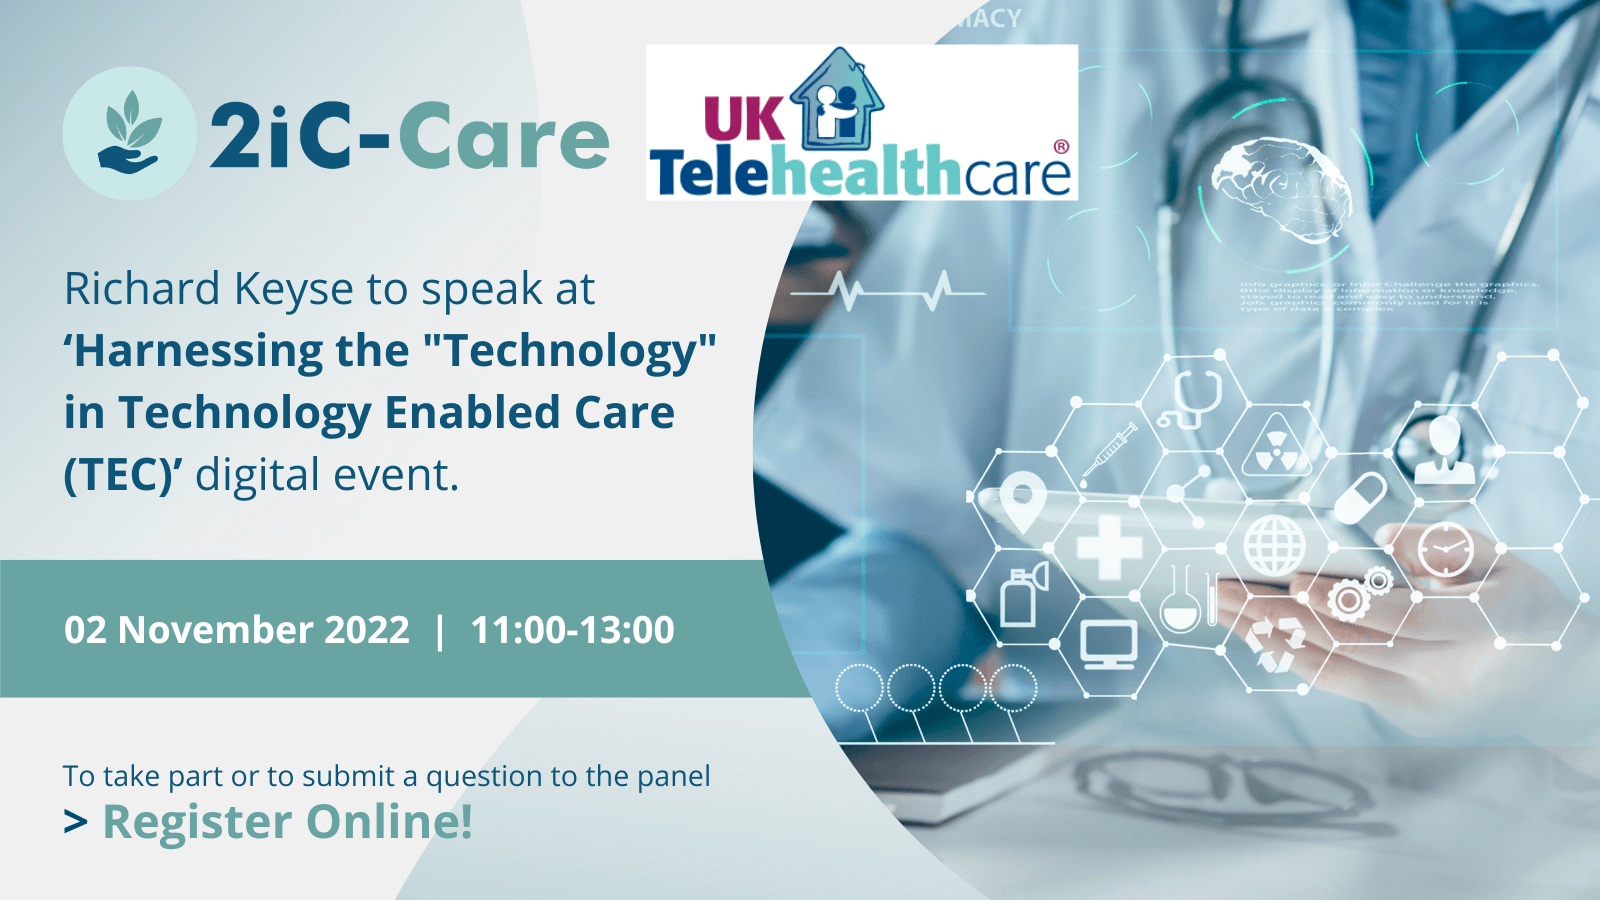 Richard Keyse to speak at ‘Harnessing the "Technology" in Technology Enabled Care (TEC)’ digital event